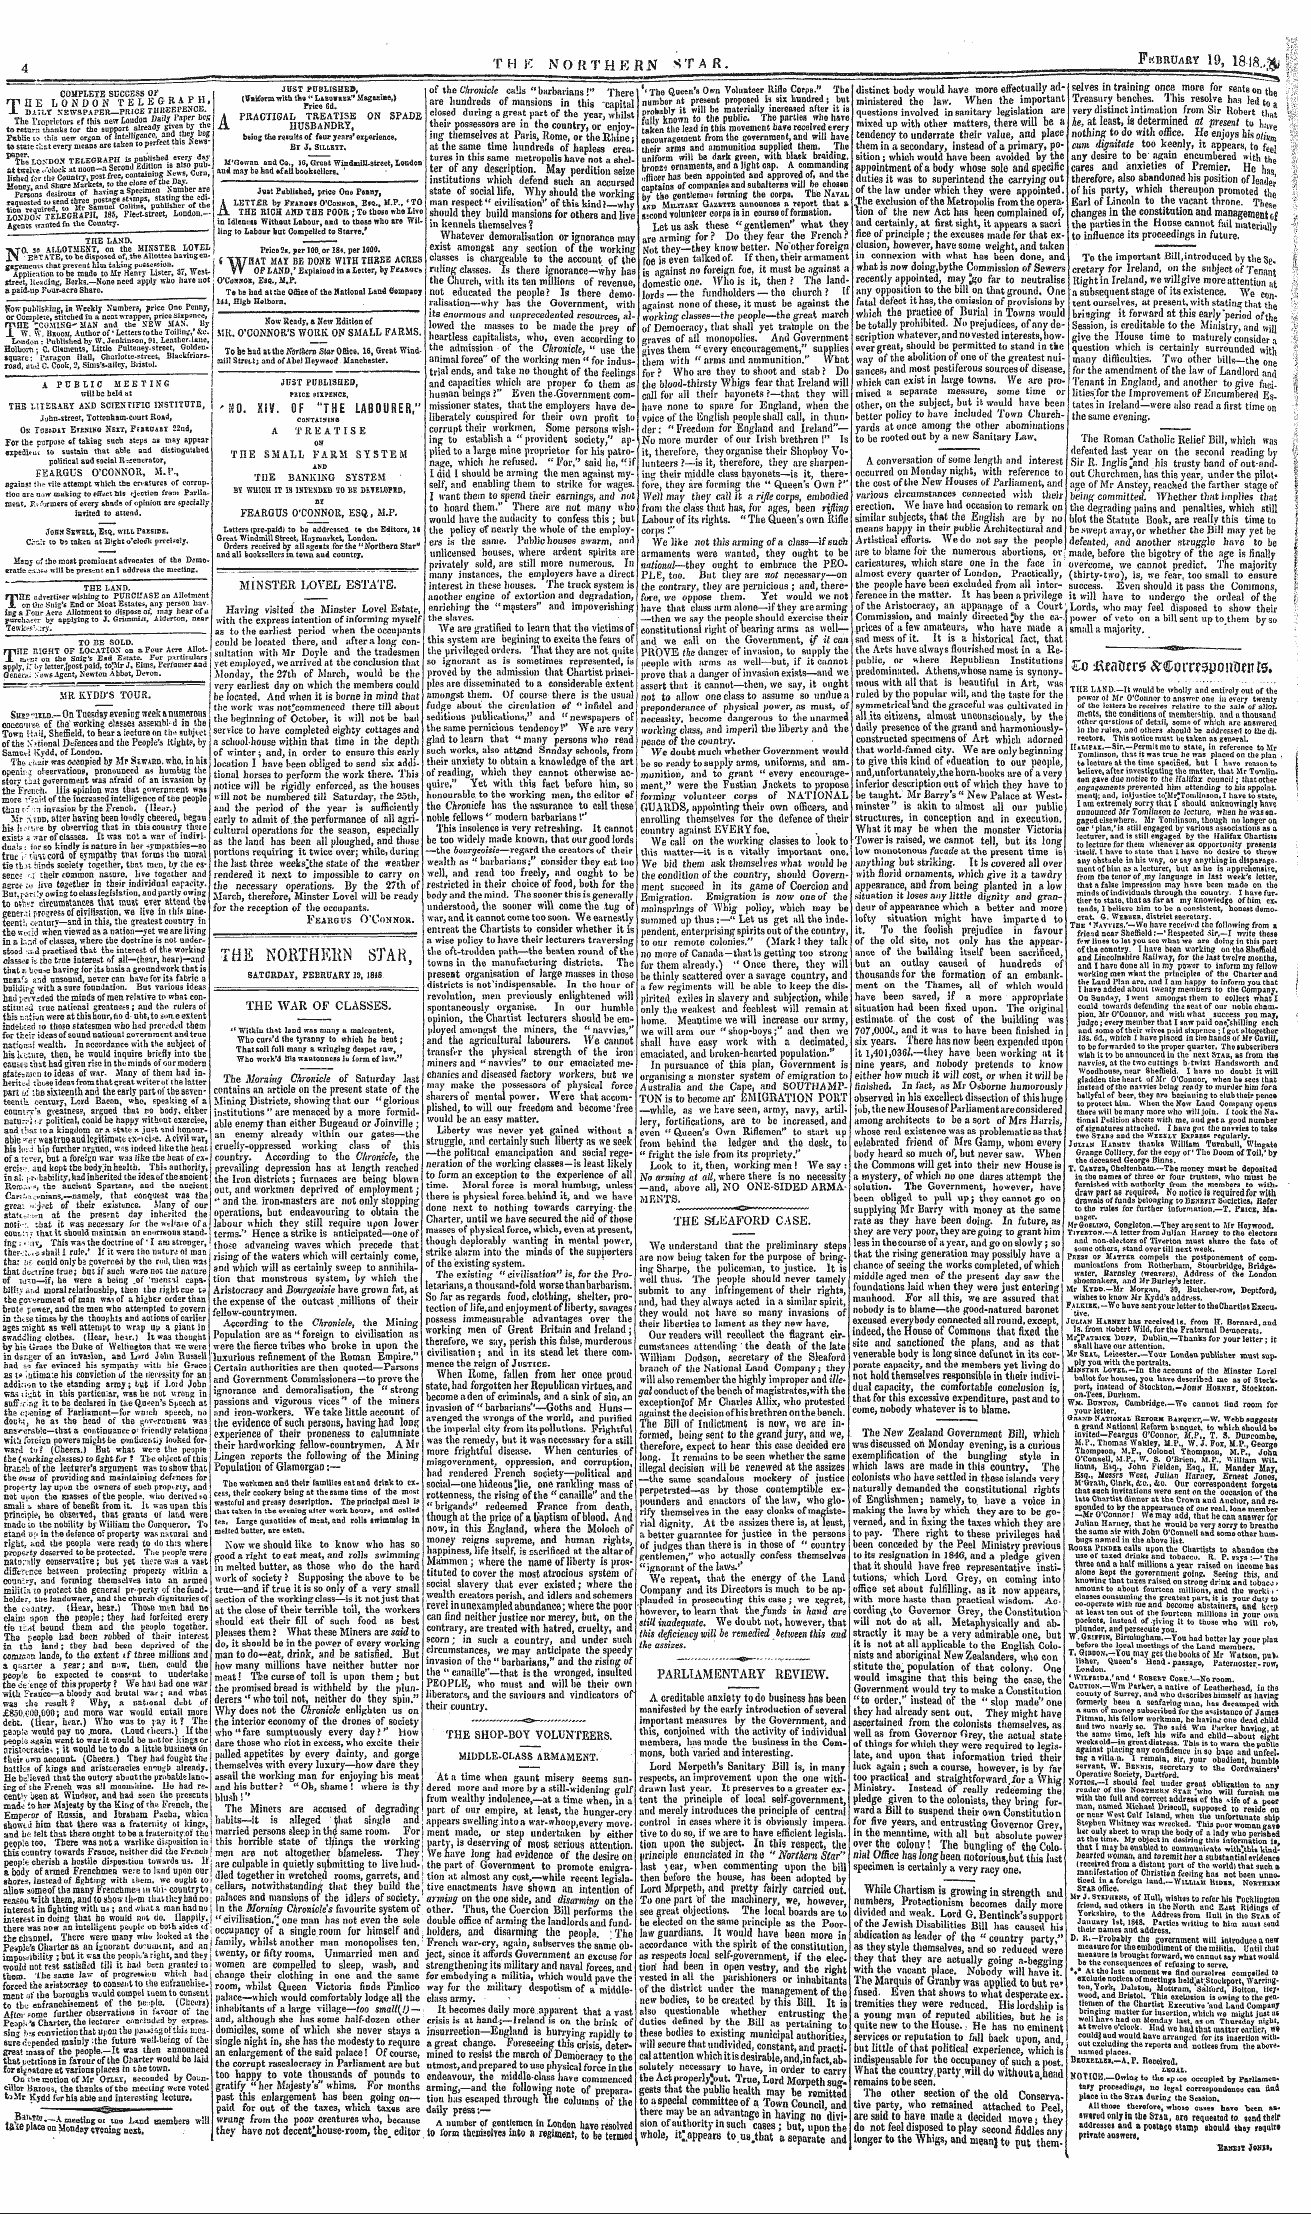 Northern Star (1837-1852): jS F Y, 2nd edition - The Northern Star, Saturday, February Id, 1848